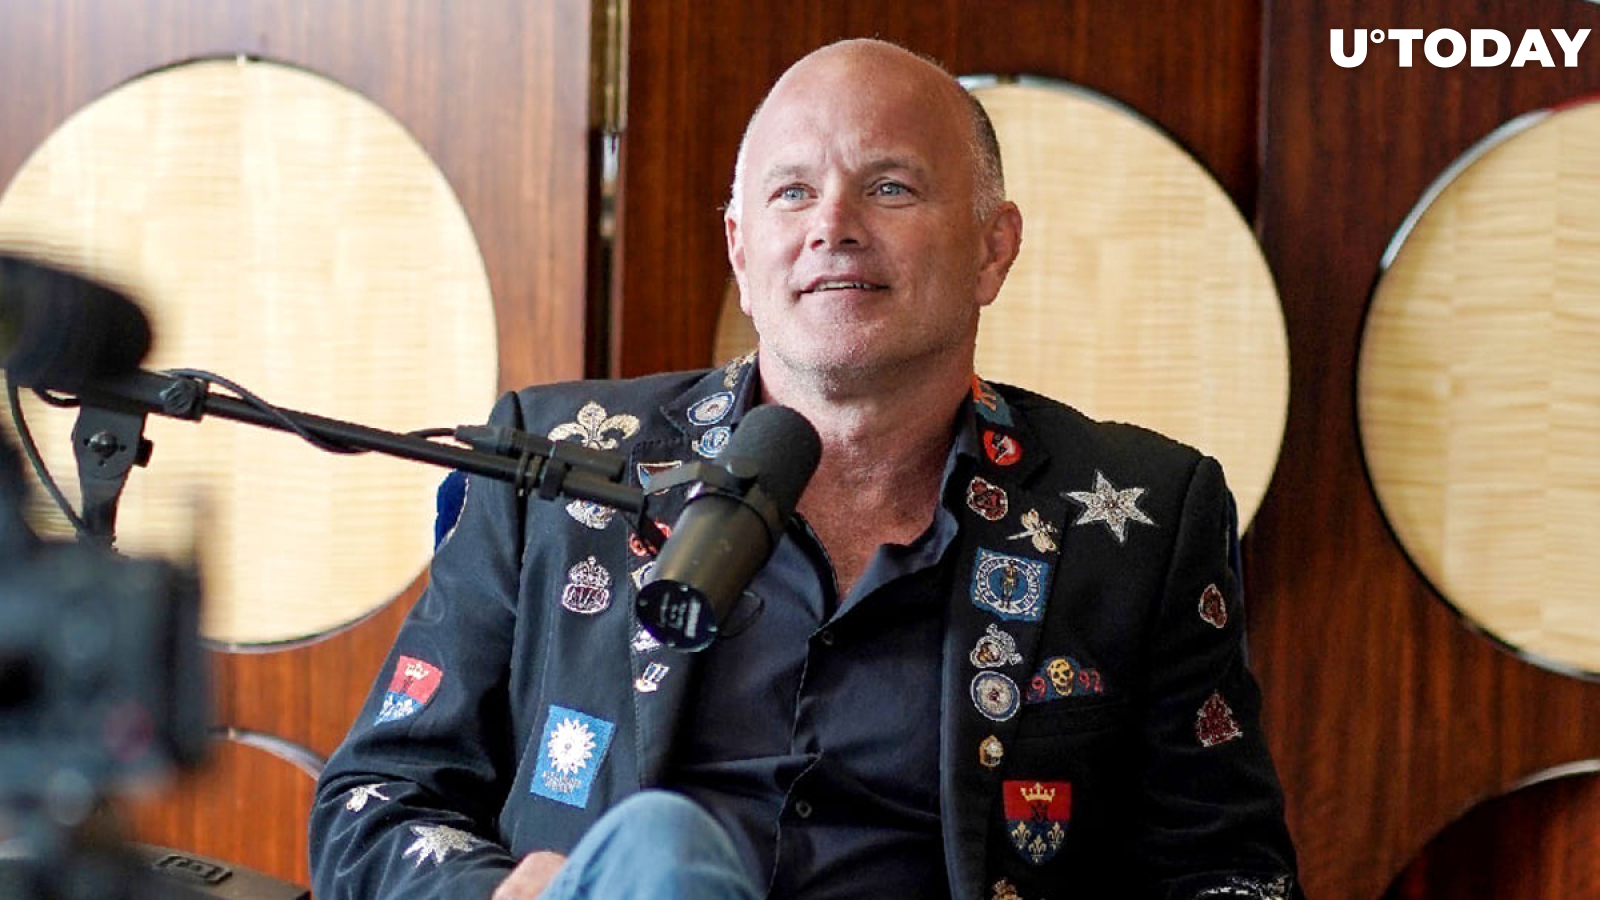 Mike Novogratz Defends His Criticism of XRP: "I Did Not Bring a Lawsuit Against Ripple"